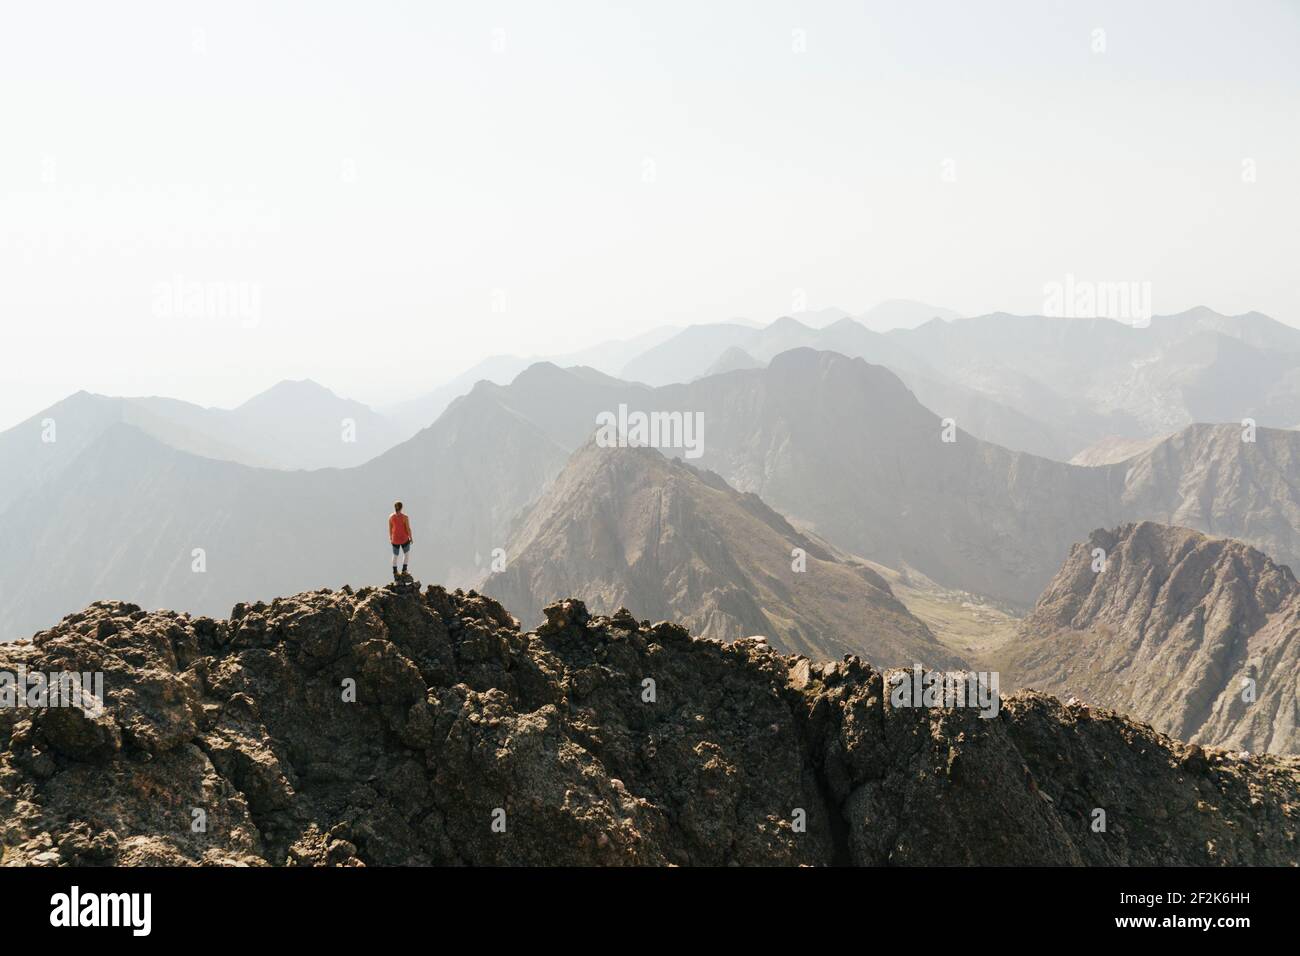 Woman looking at view while standing on peak of mountain against clear sky Stock Photo